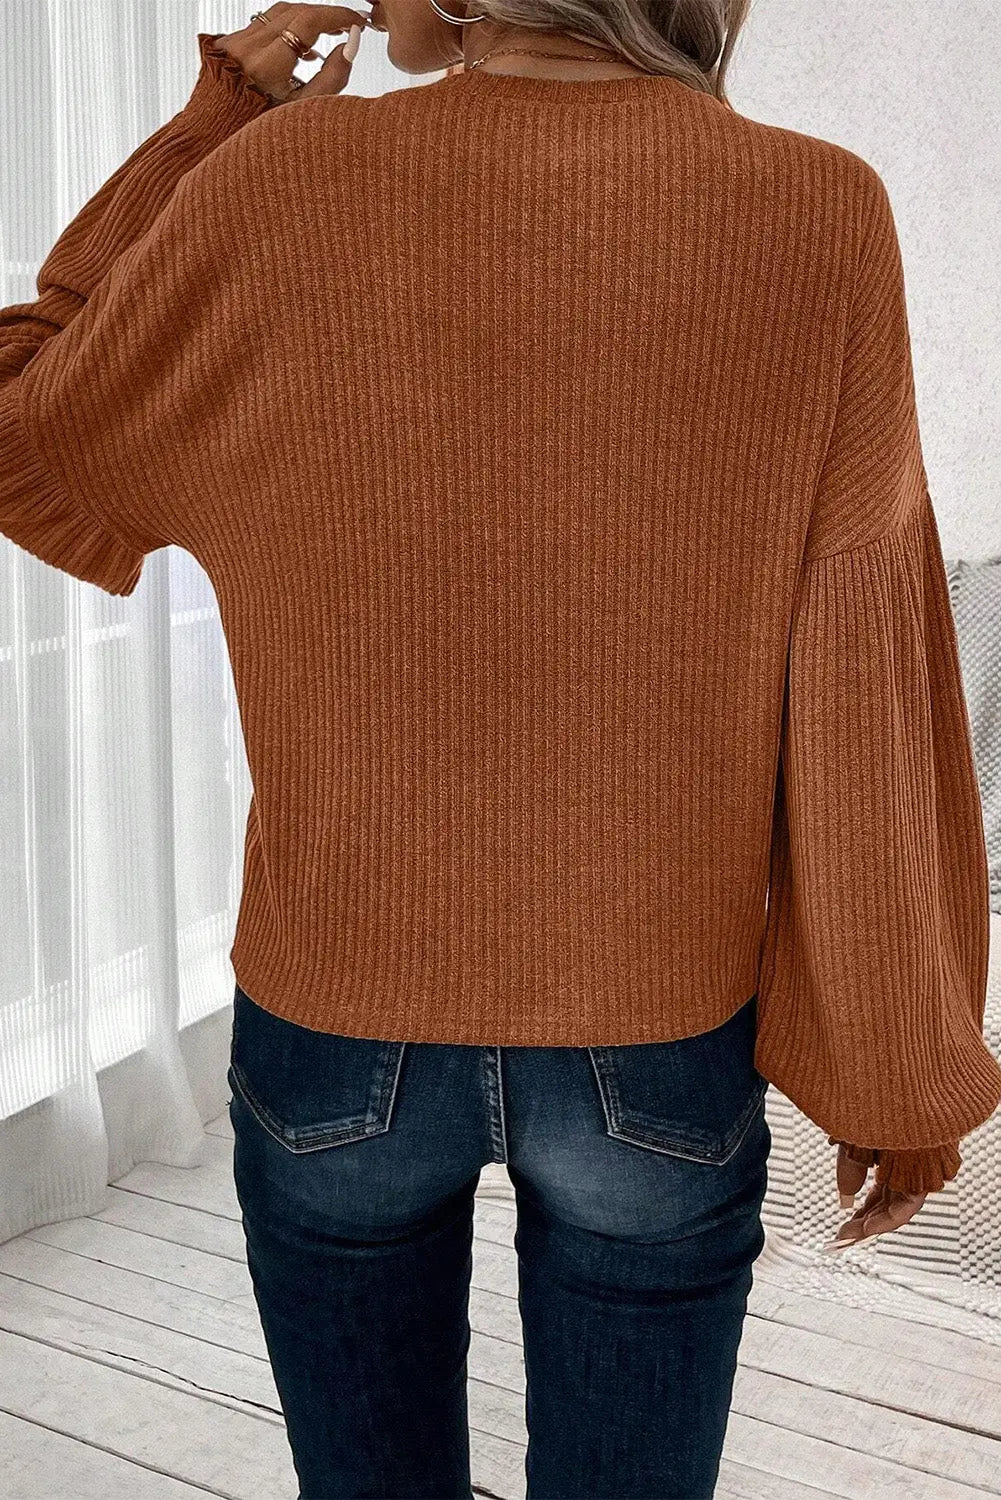 Chestnut ribbed knit drop shoulder ruffled sleeve textured top - long tops